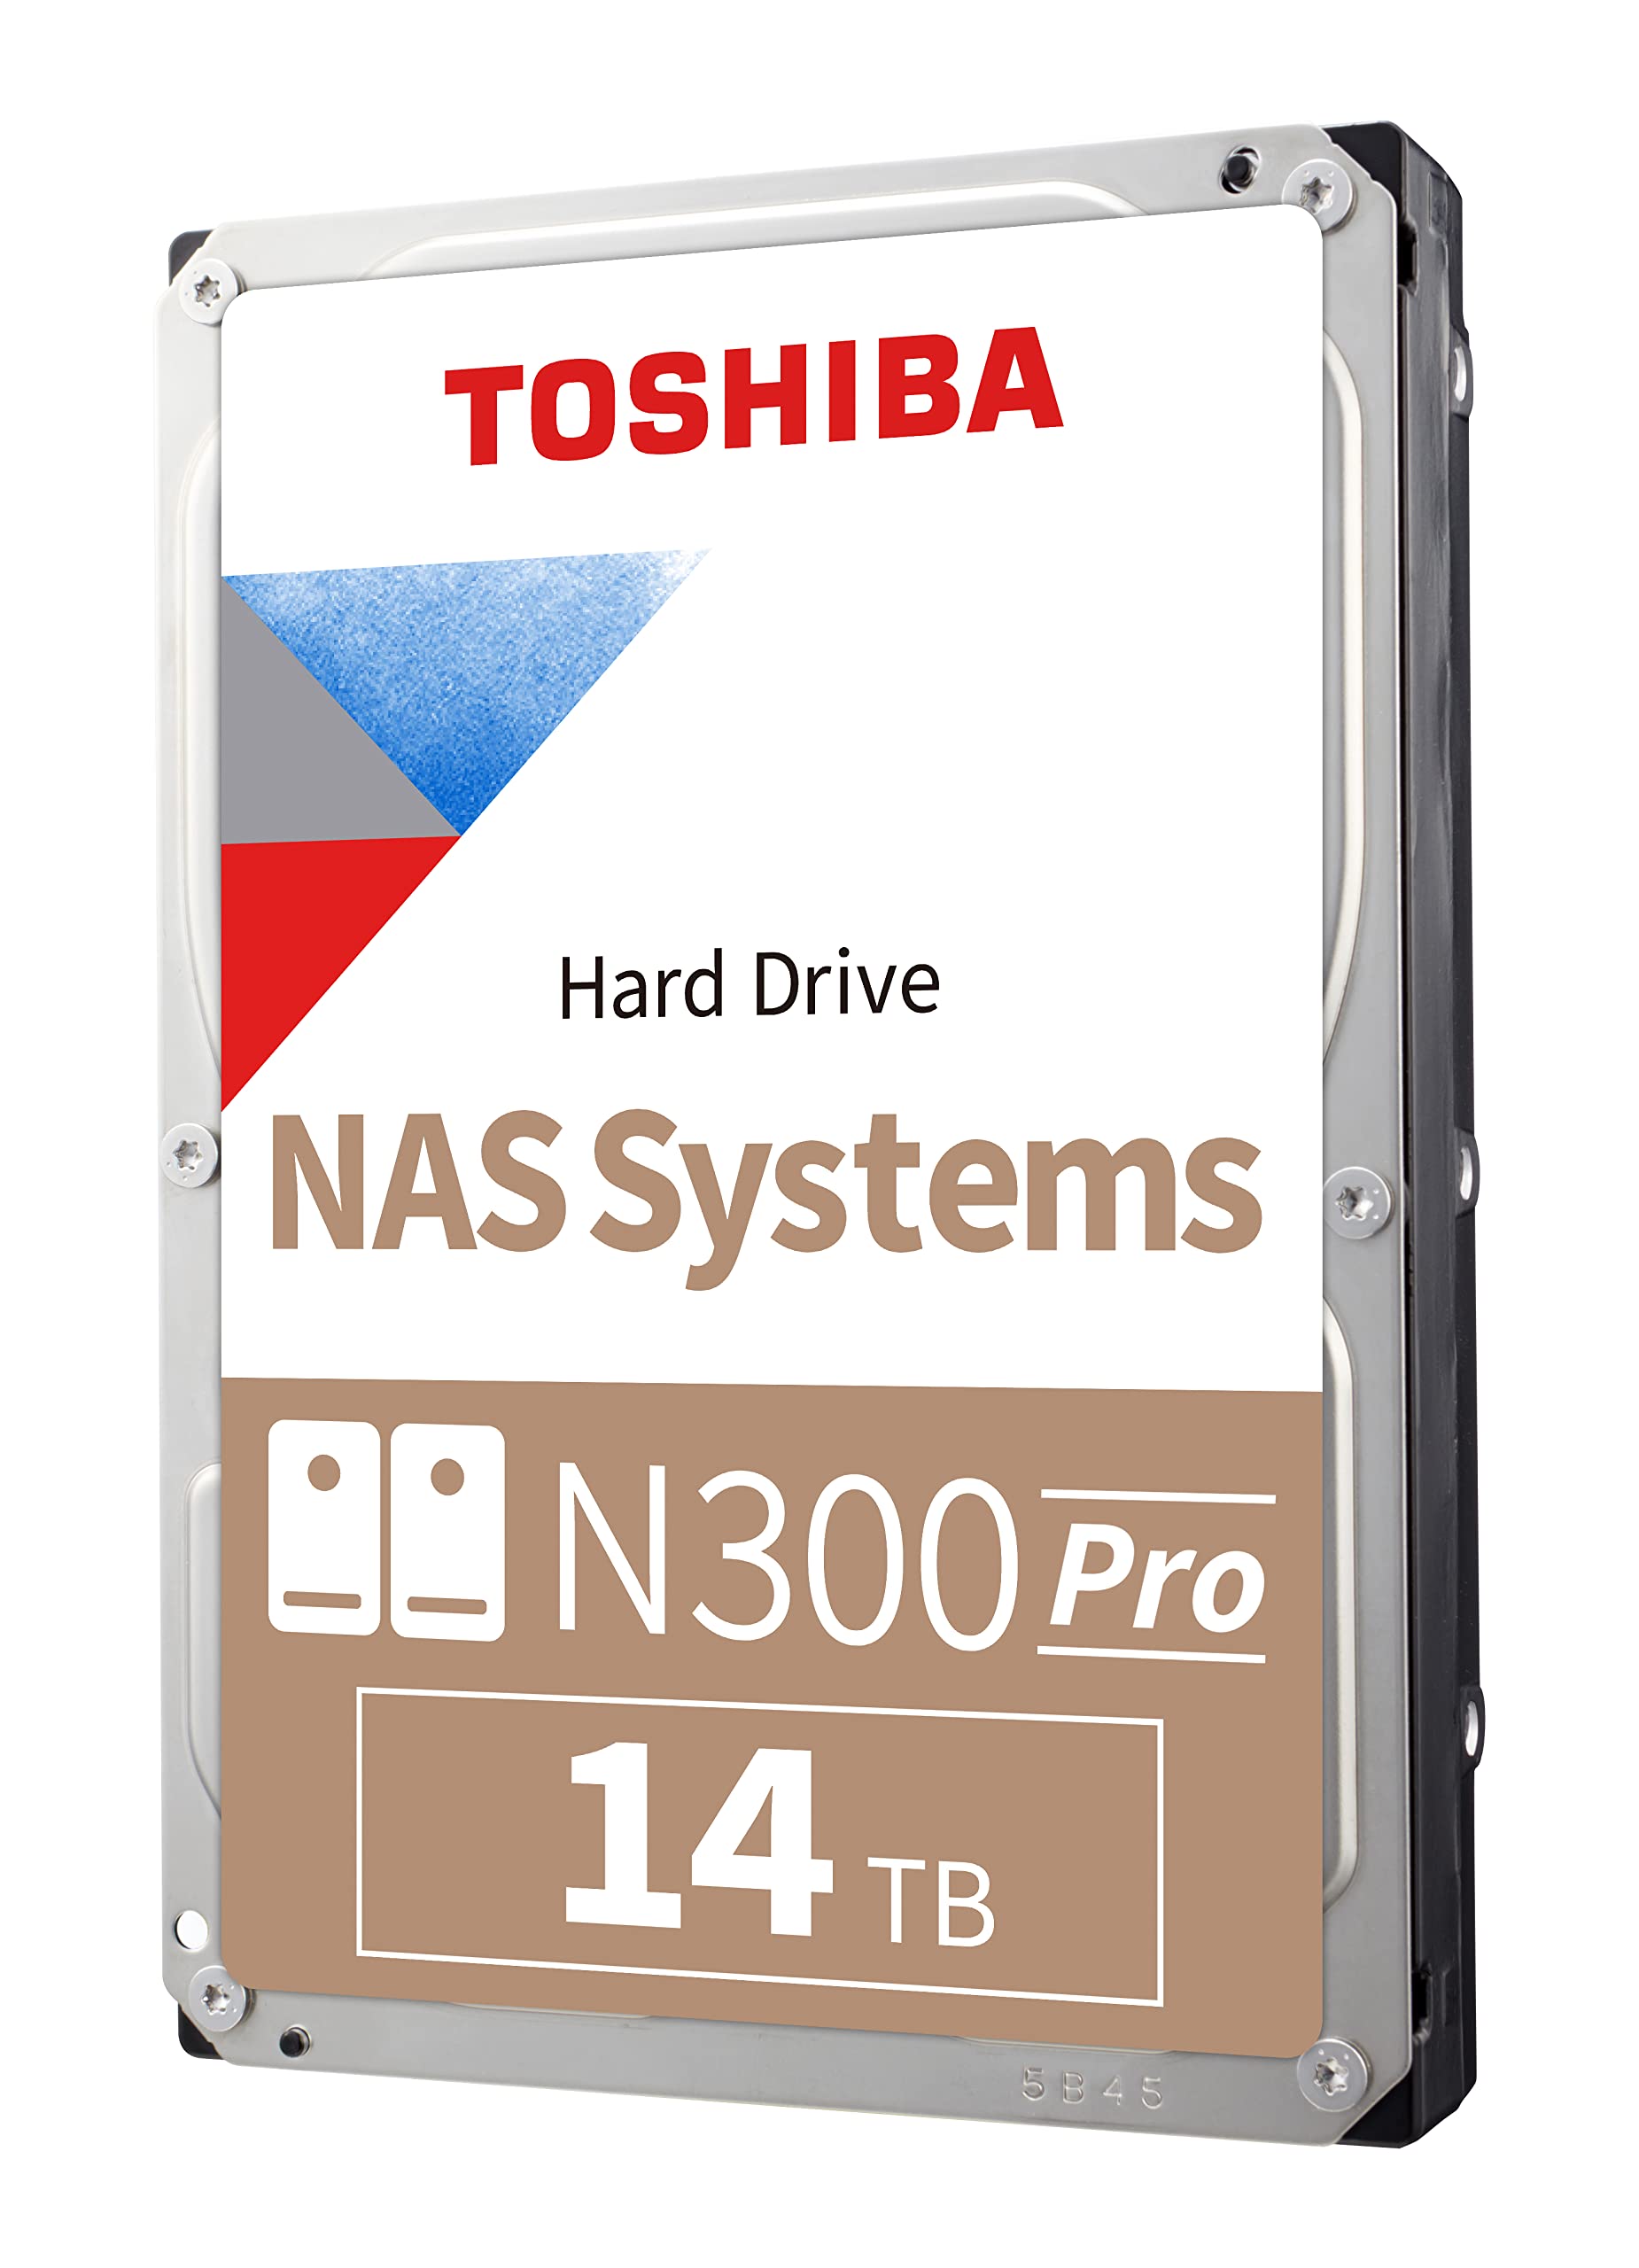 Toshiba N300 PRO 14TB Large-Sized Business NAS (up to 24 bays) 3.5-Inch Internal Hard Drive - Up to 300 TB/year Workload Rate CMR SATA 6 GB/s 7200 RPM 512 MB Cache - HDWG51EXZSTB